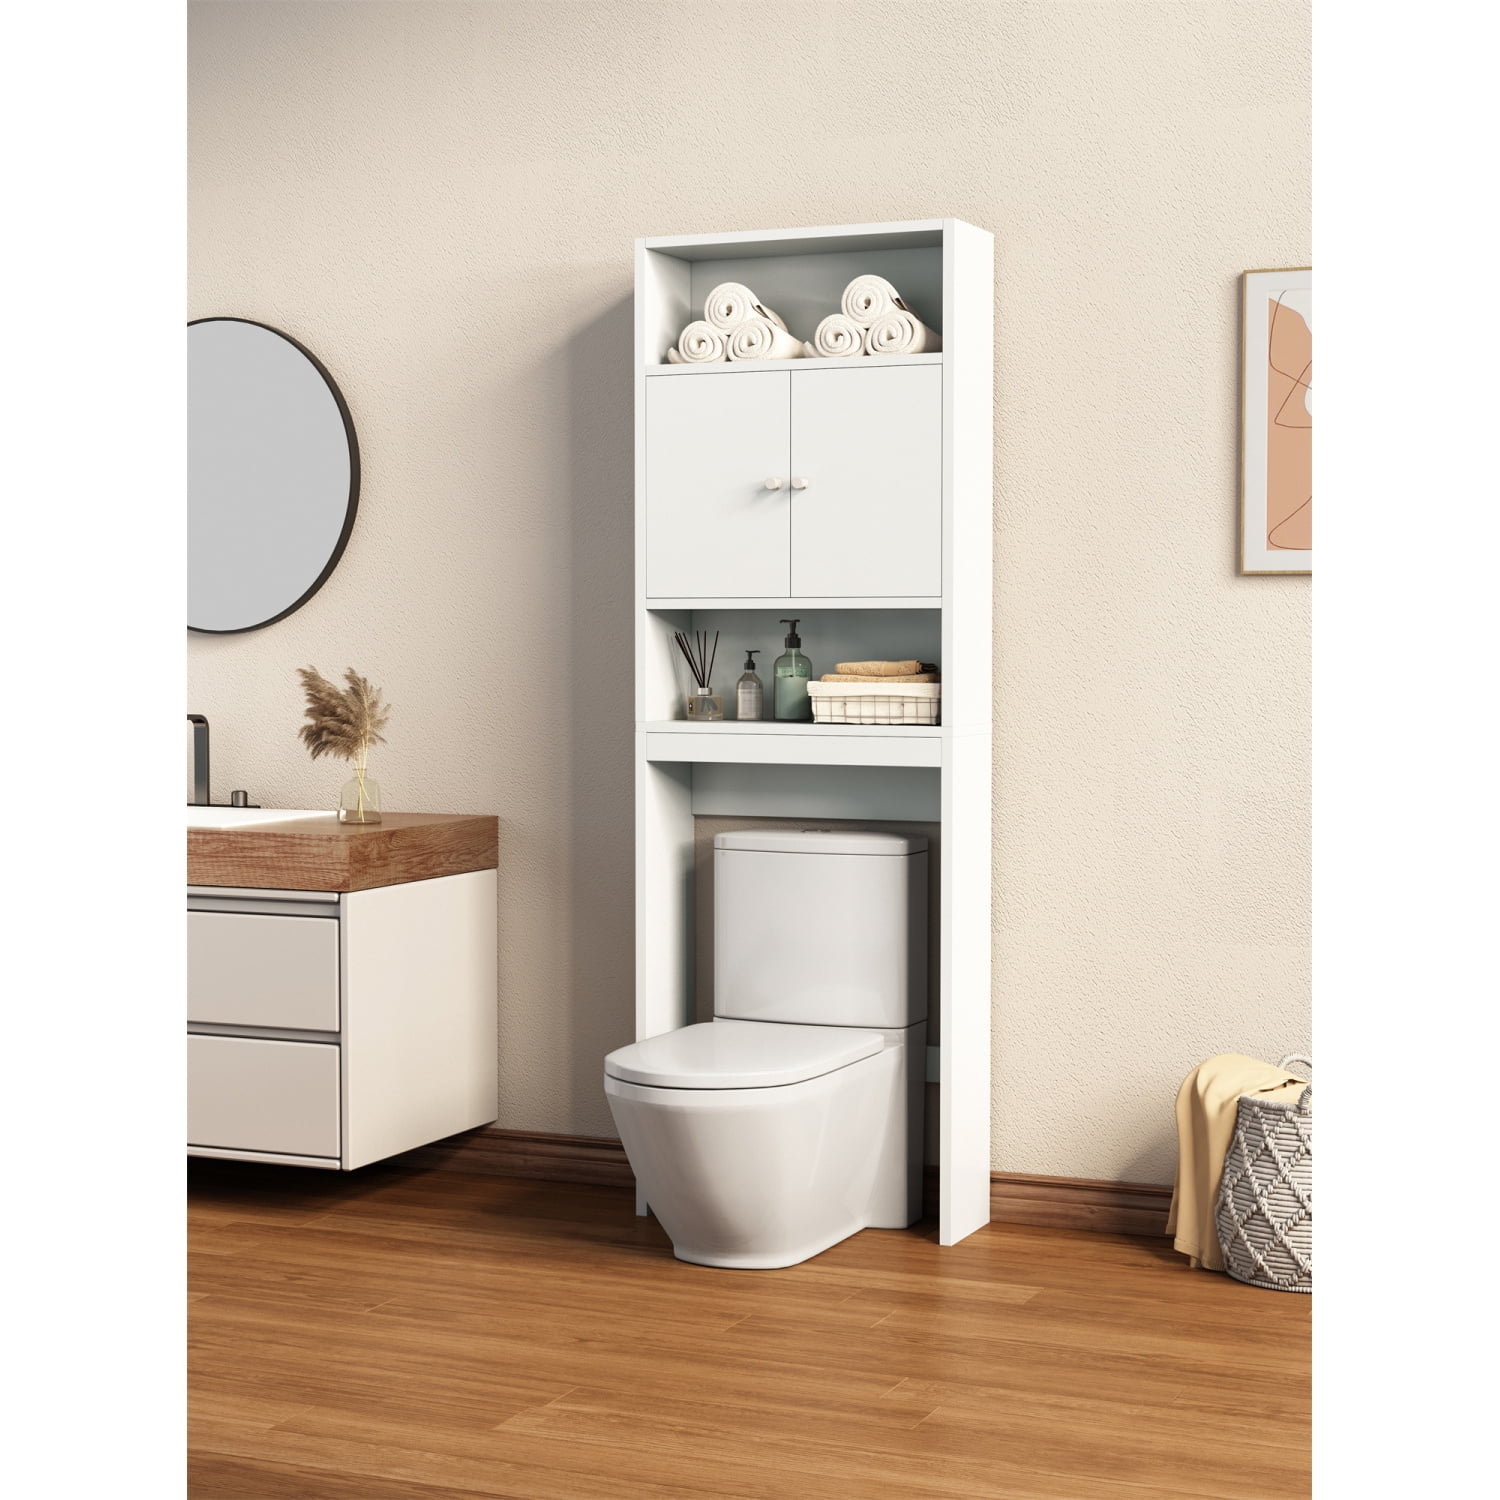 Finnhomy Over The Toilet Storage Cabinet with Doors, Over Toilet Bathroom  Organizer, 3-Tier Bathroom Space Saver Organizer with Shelf,  Multifunctional